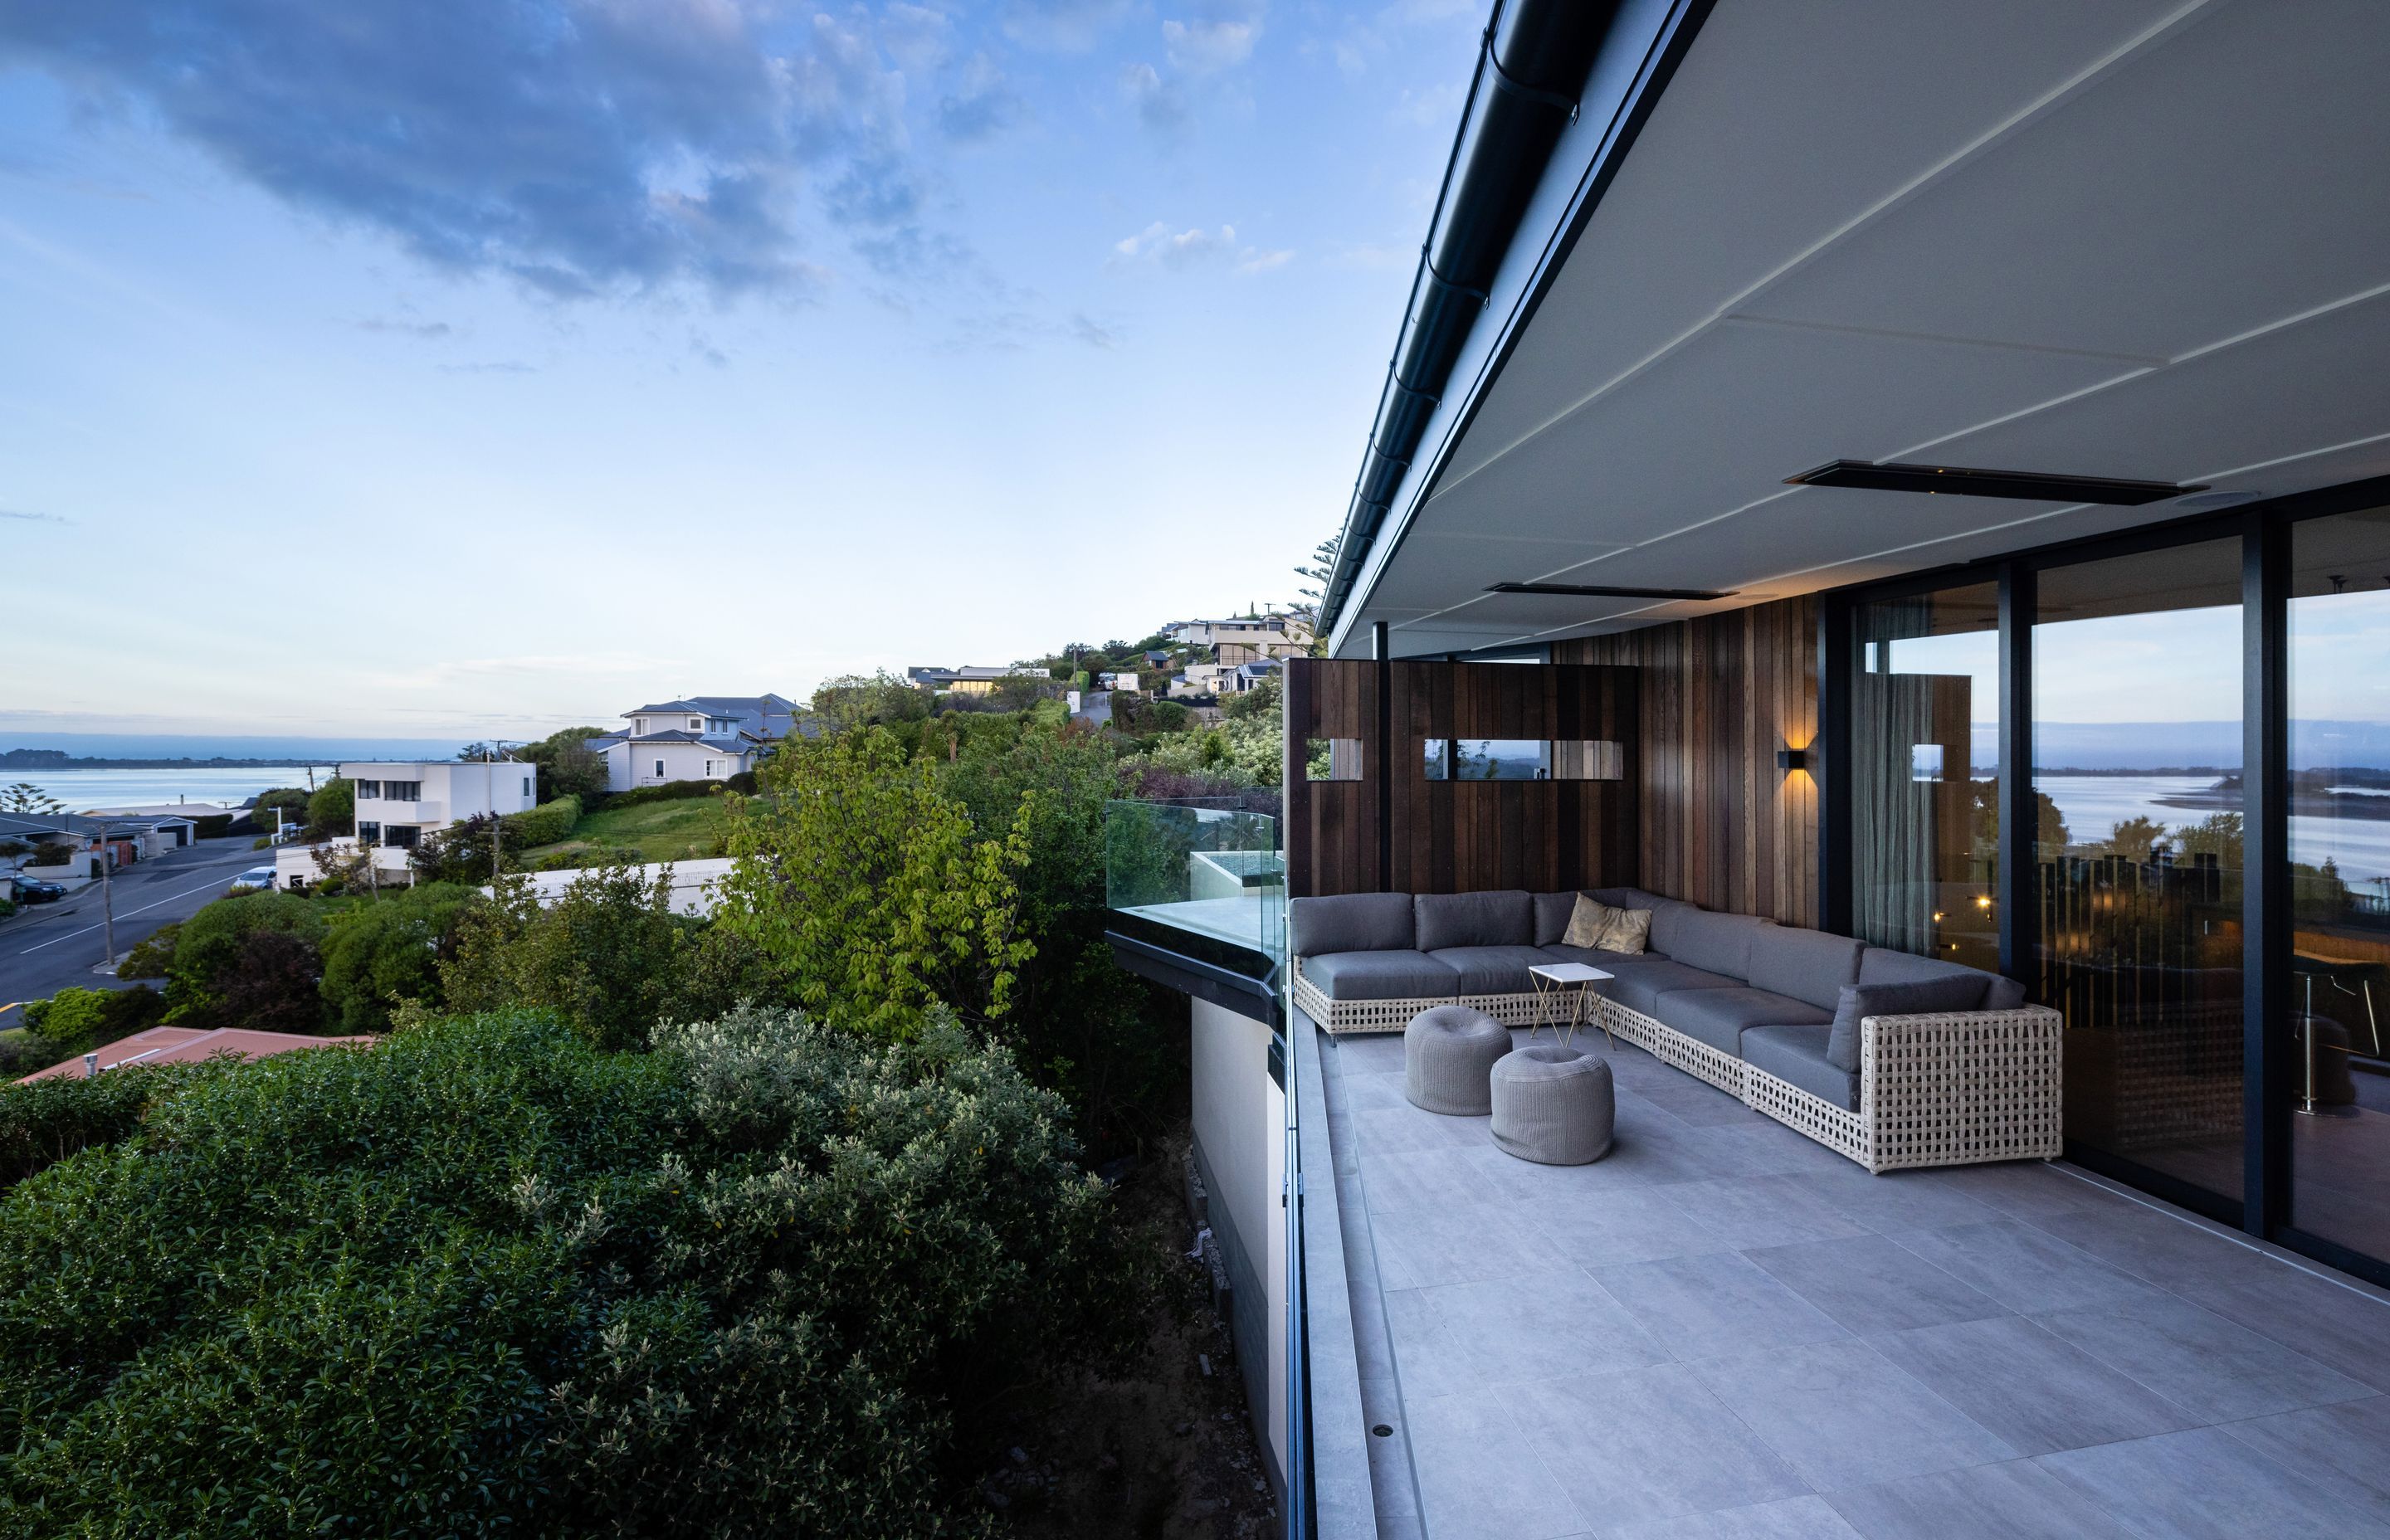 A cedar clad dividing wall, separates the master bedroom balcony from the outdoor entertainment space.